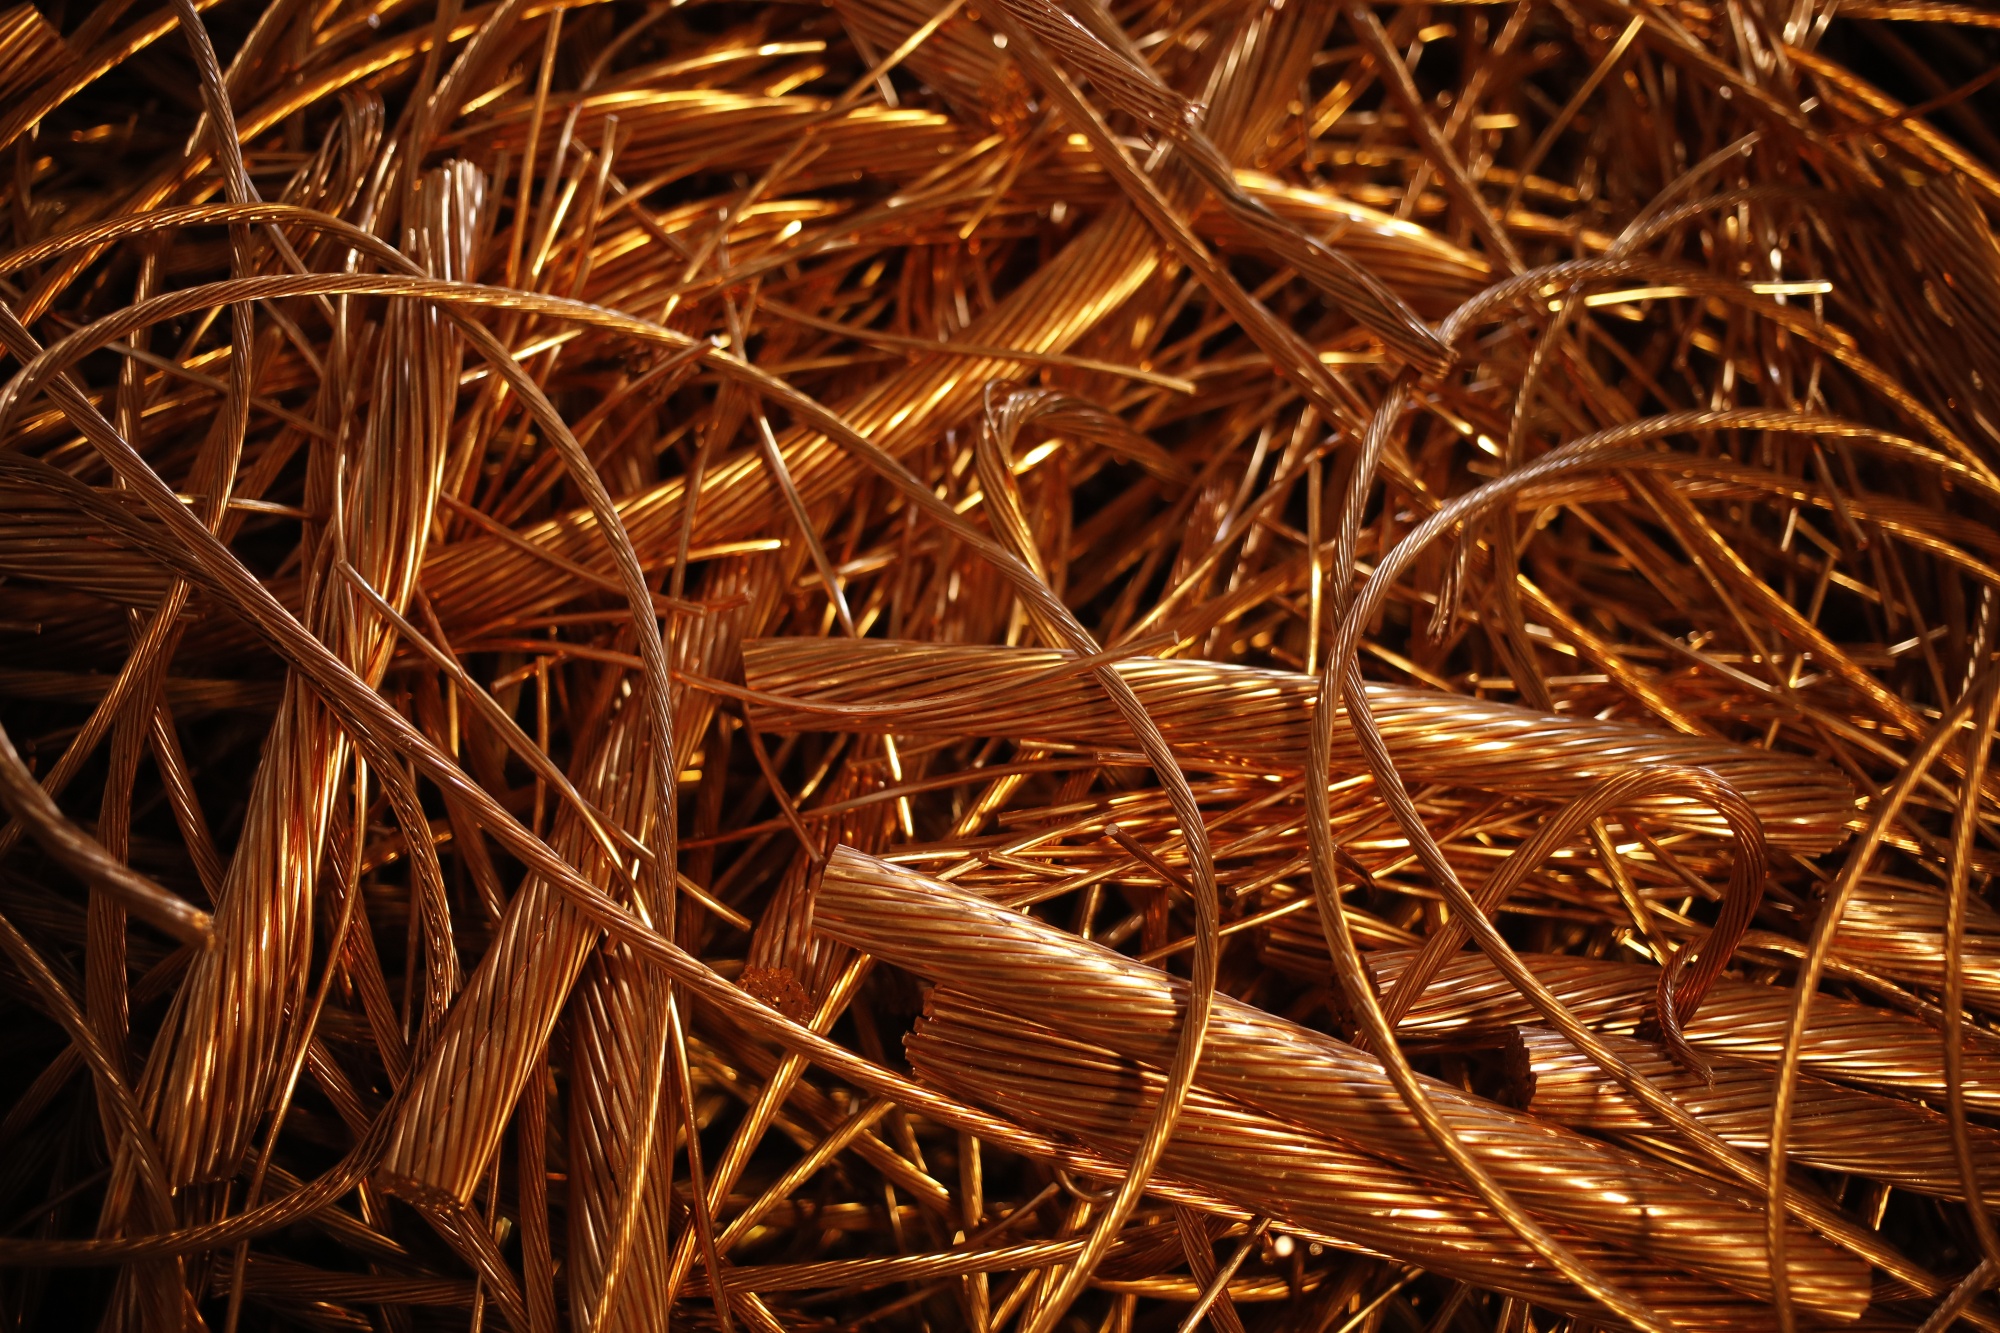 Integrated copper brings net gains for Garware and environment